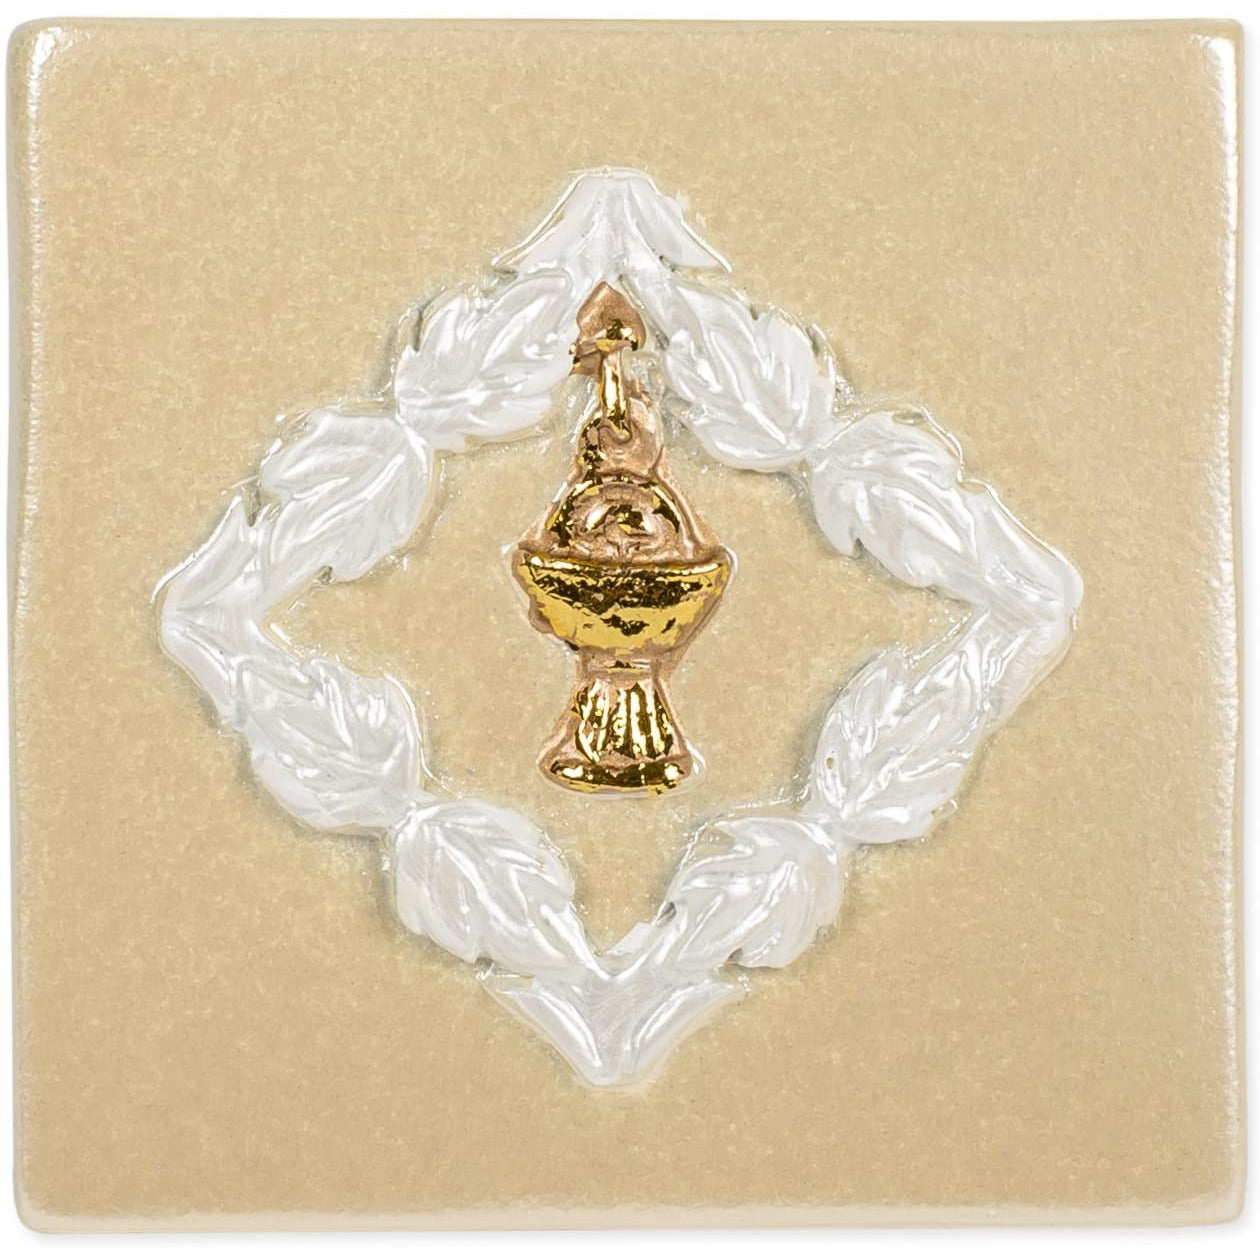 First Communion Gold Tone Chalice Design Small 1.5 inch Decorative Table Top Rosary Jewelry Box